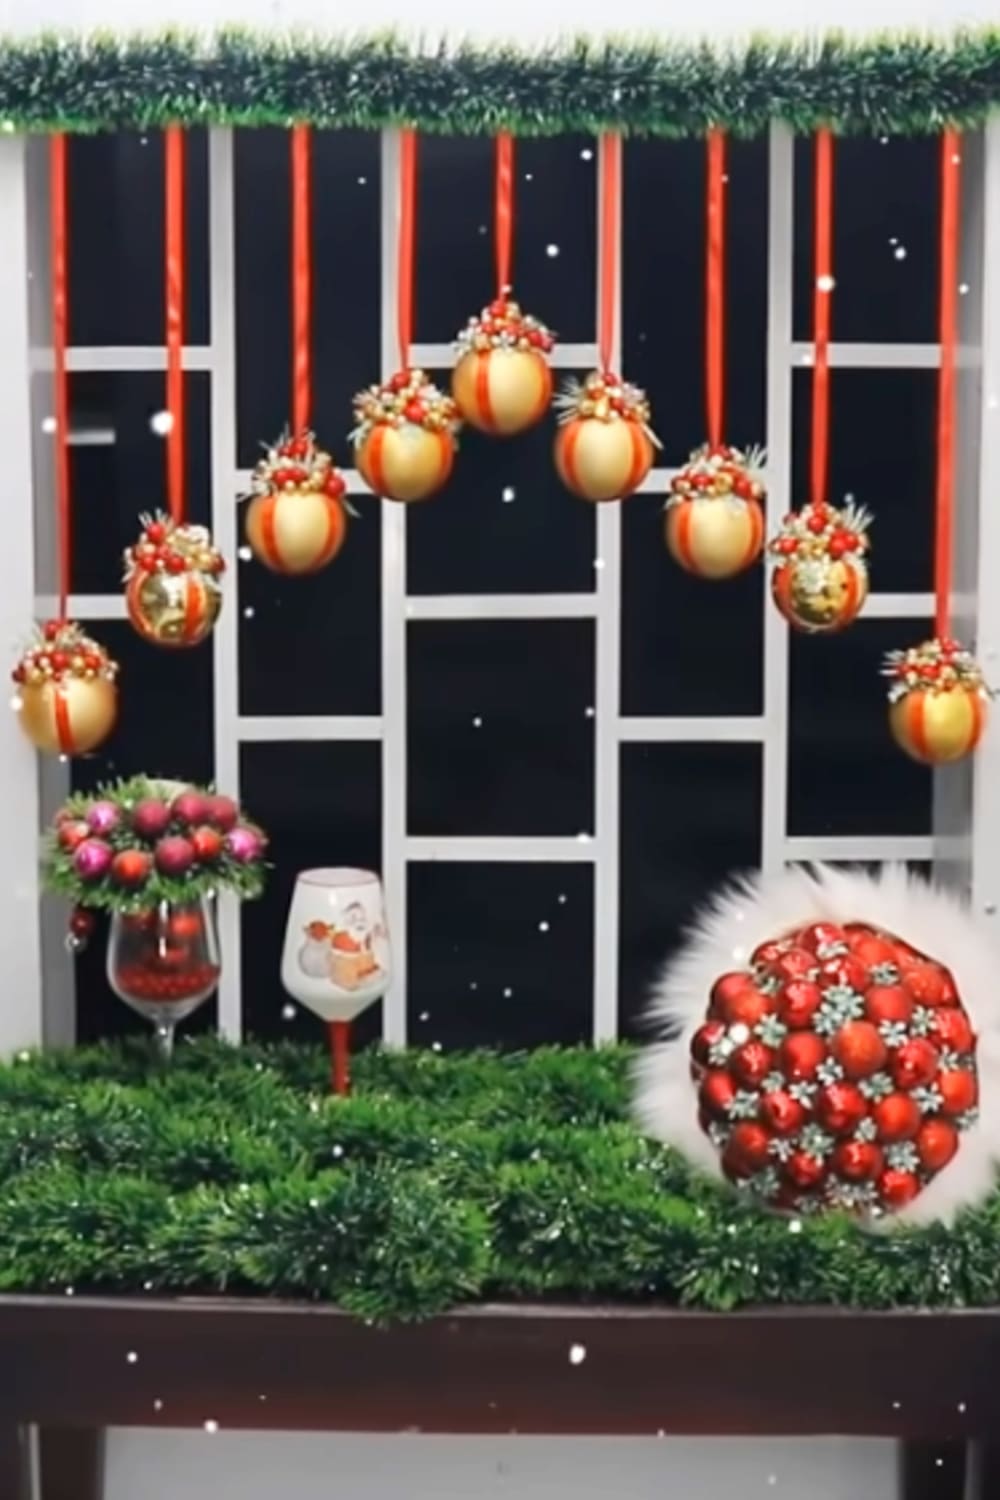 Christmas crafts for adults-simple Christmas craft ideas for adults to make - like this DIY idea for decorating the windows in your house with handmade ornaments, garland and lights